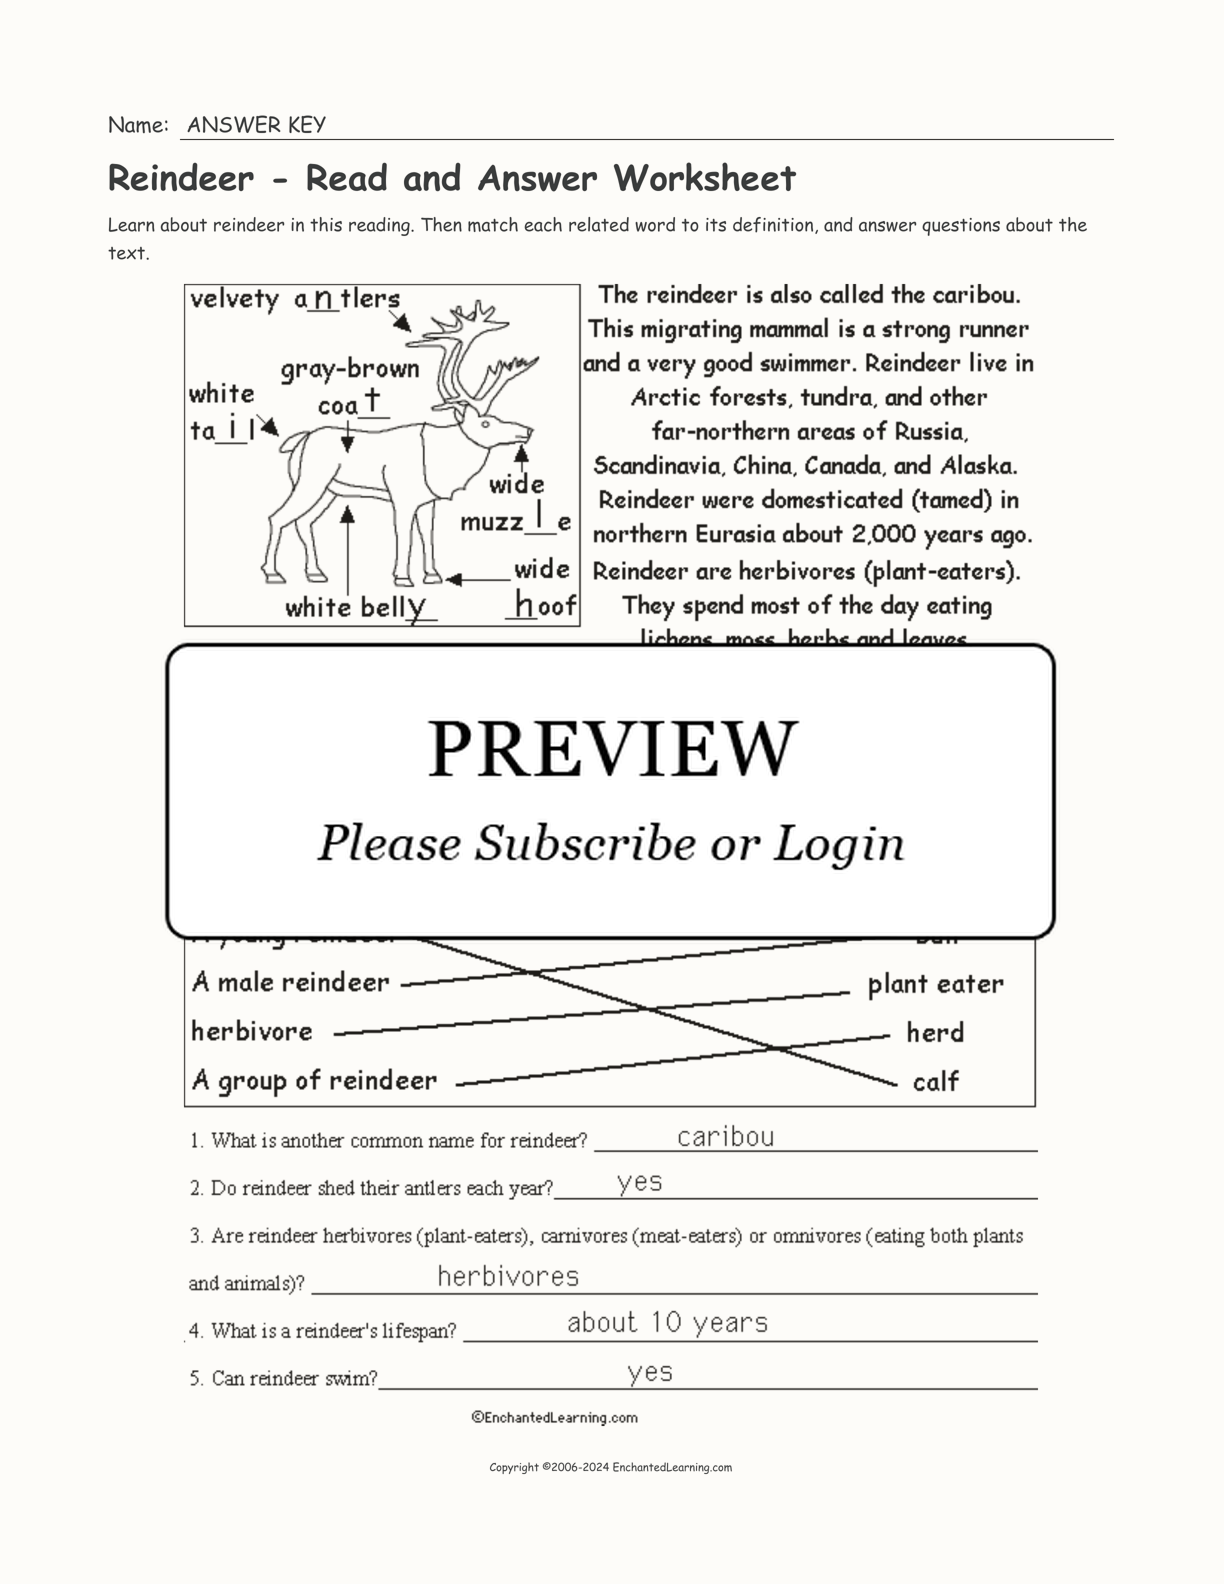 Reindeer - Read and Answer Worksheet interactive worksheet page 2